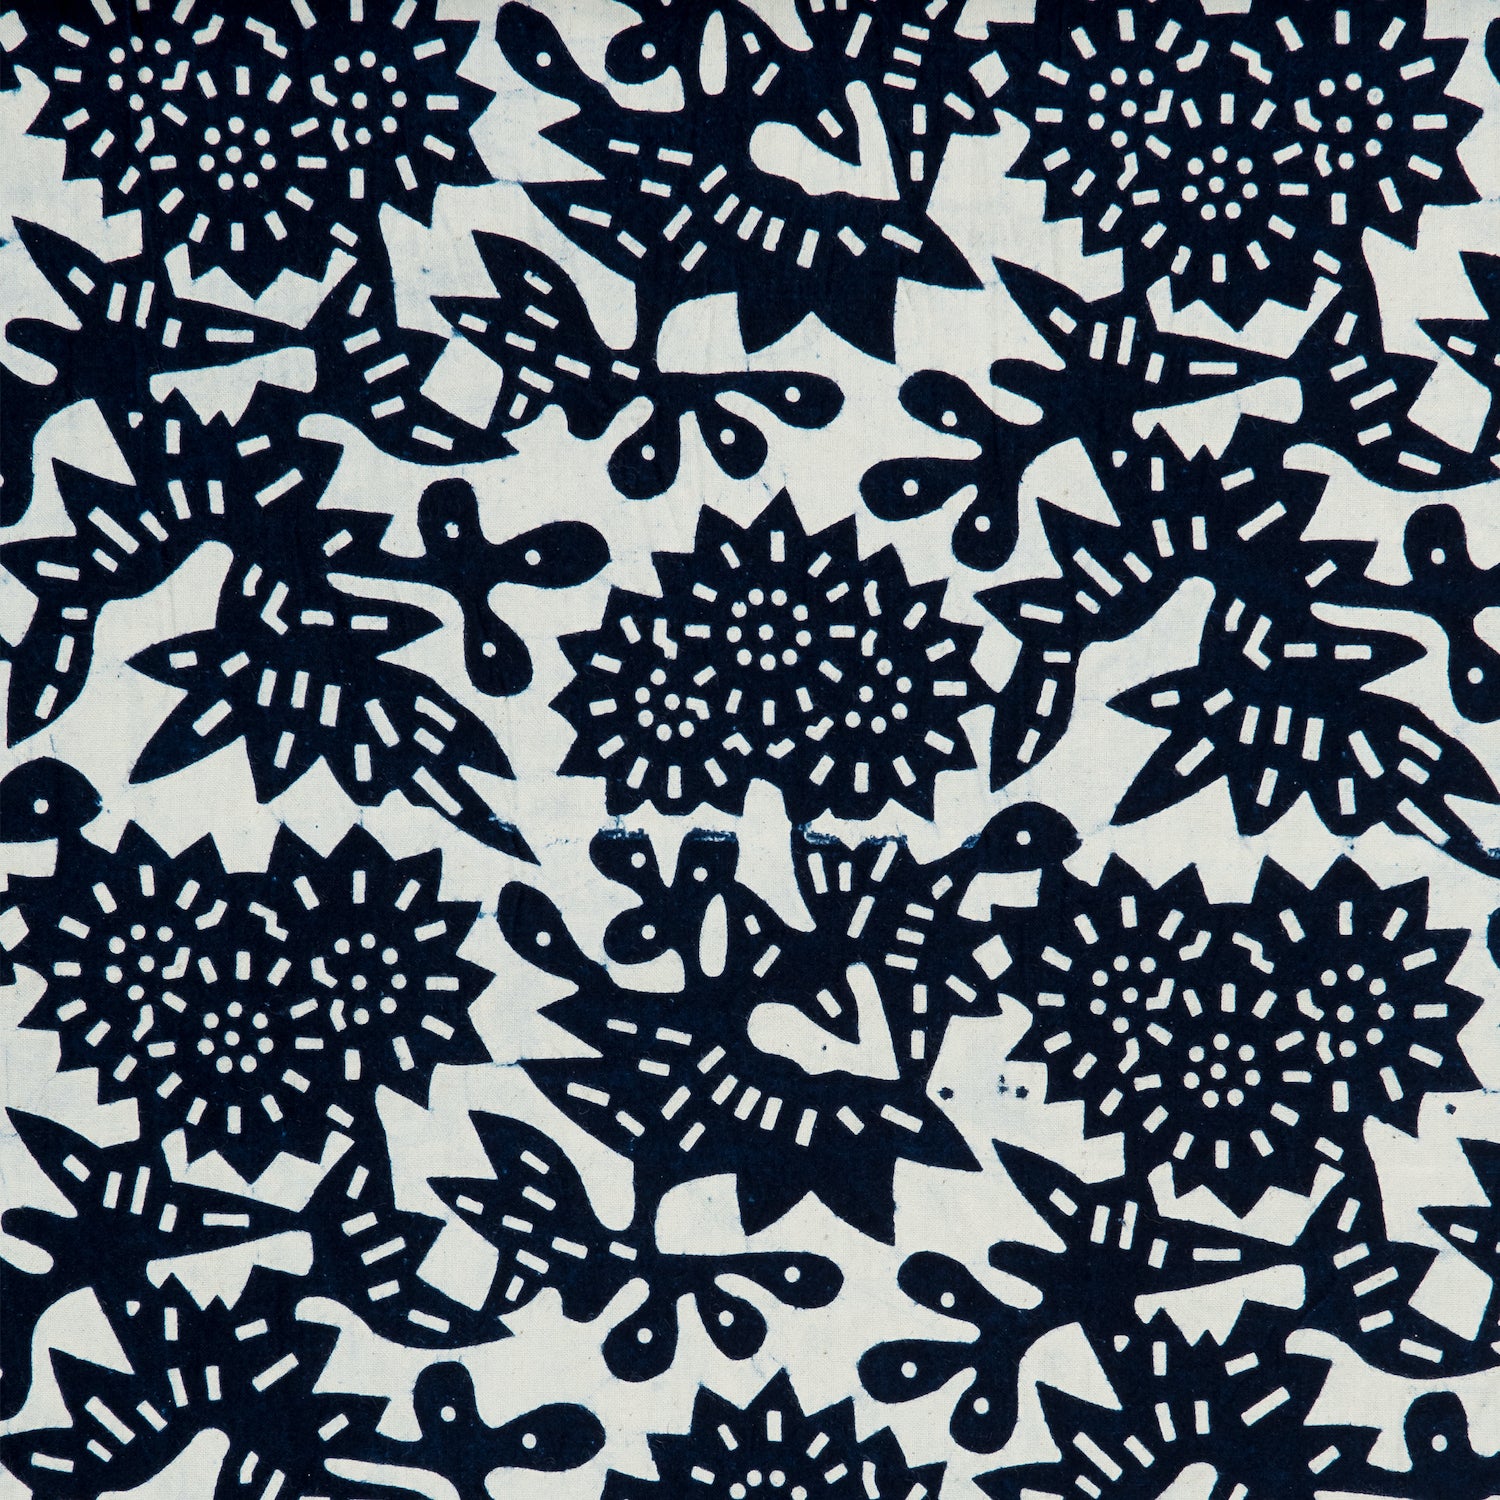 Detail of a linen-cotton fabric in a repeating geometric flower pattern in indigo on a white field.